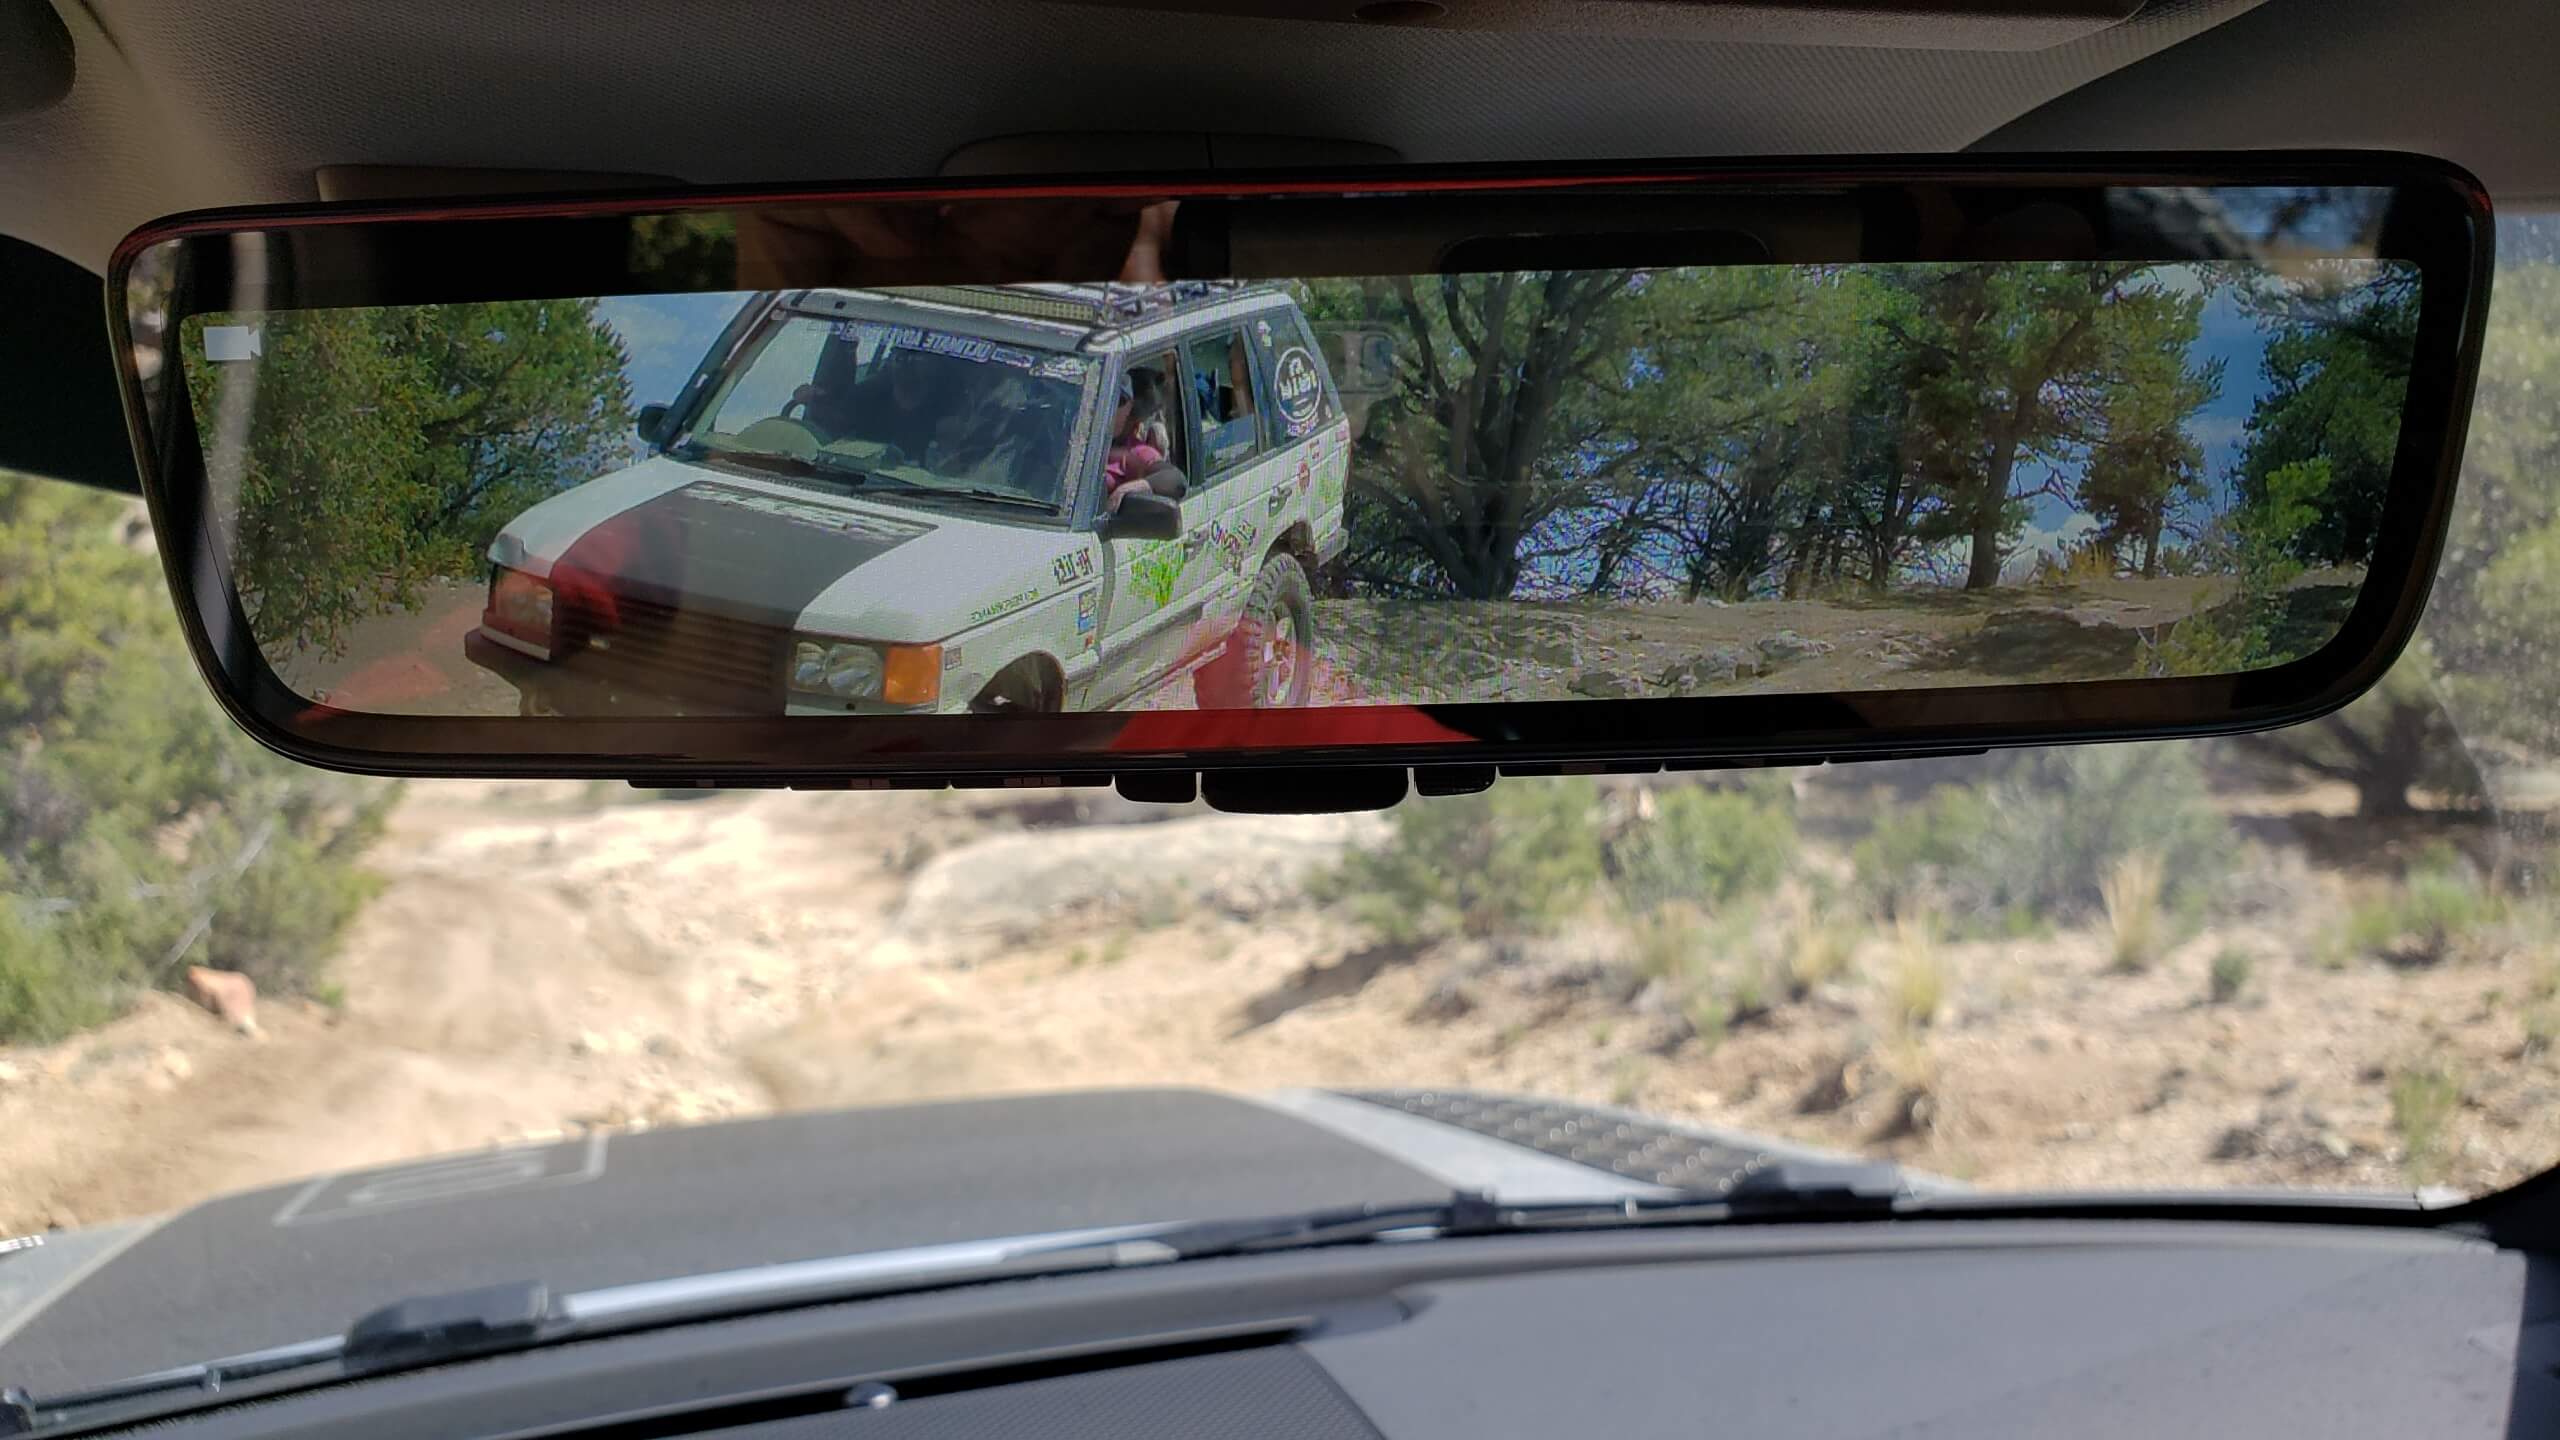 New Defenders rear view camera